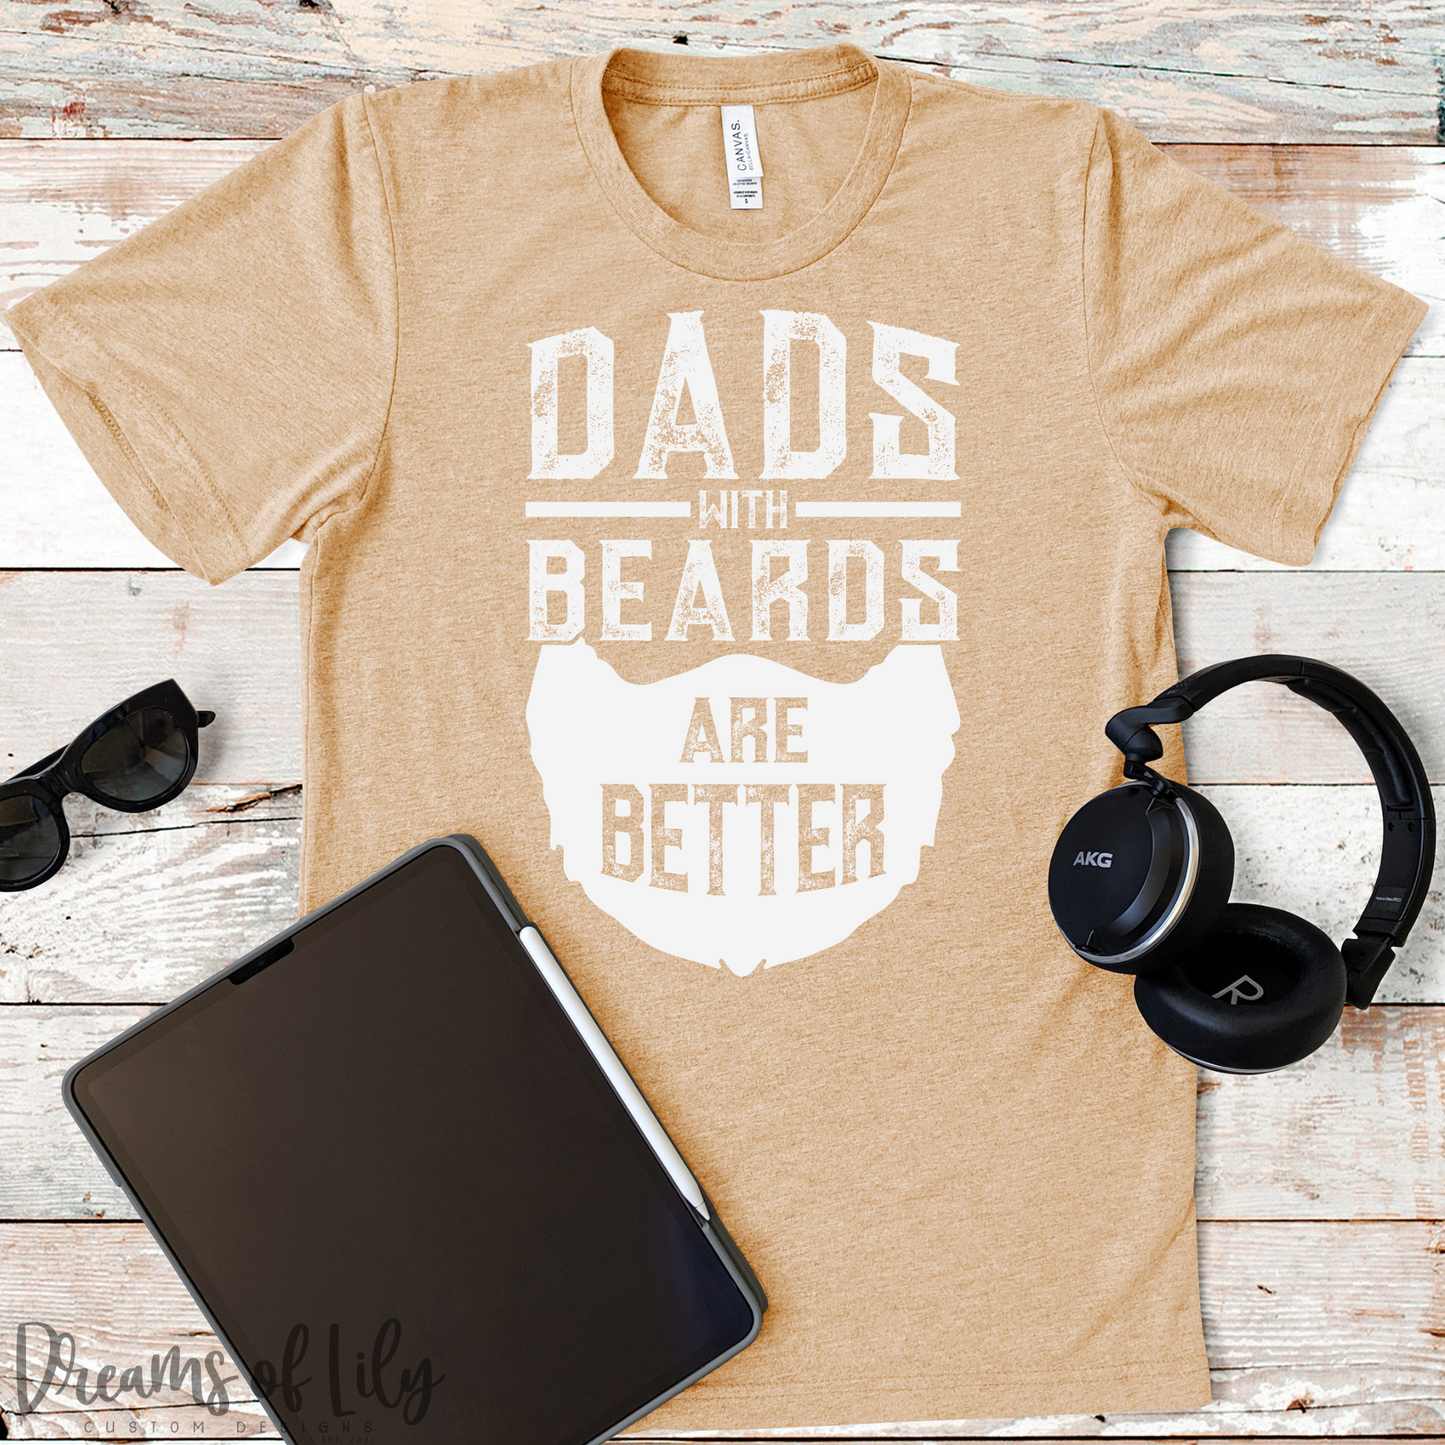 The Dads With Beards Tee